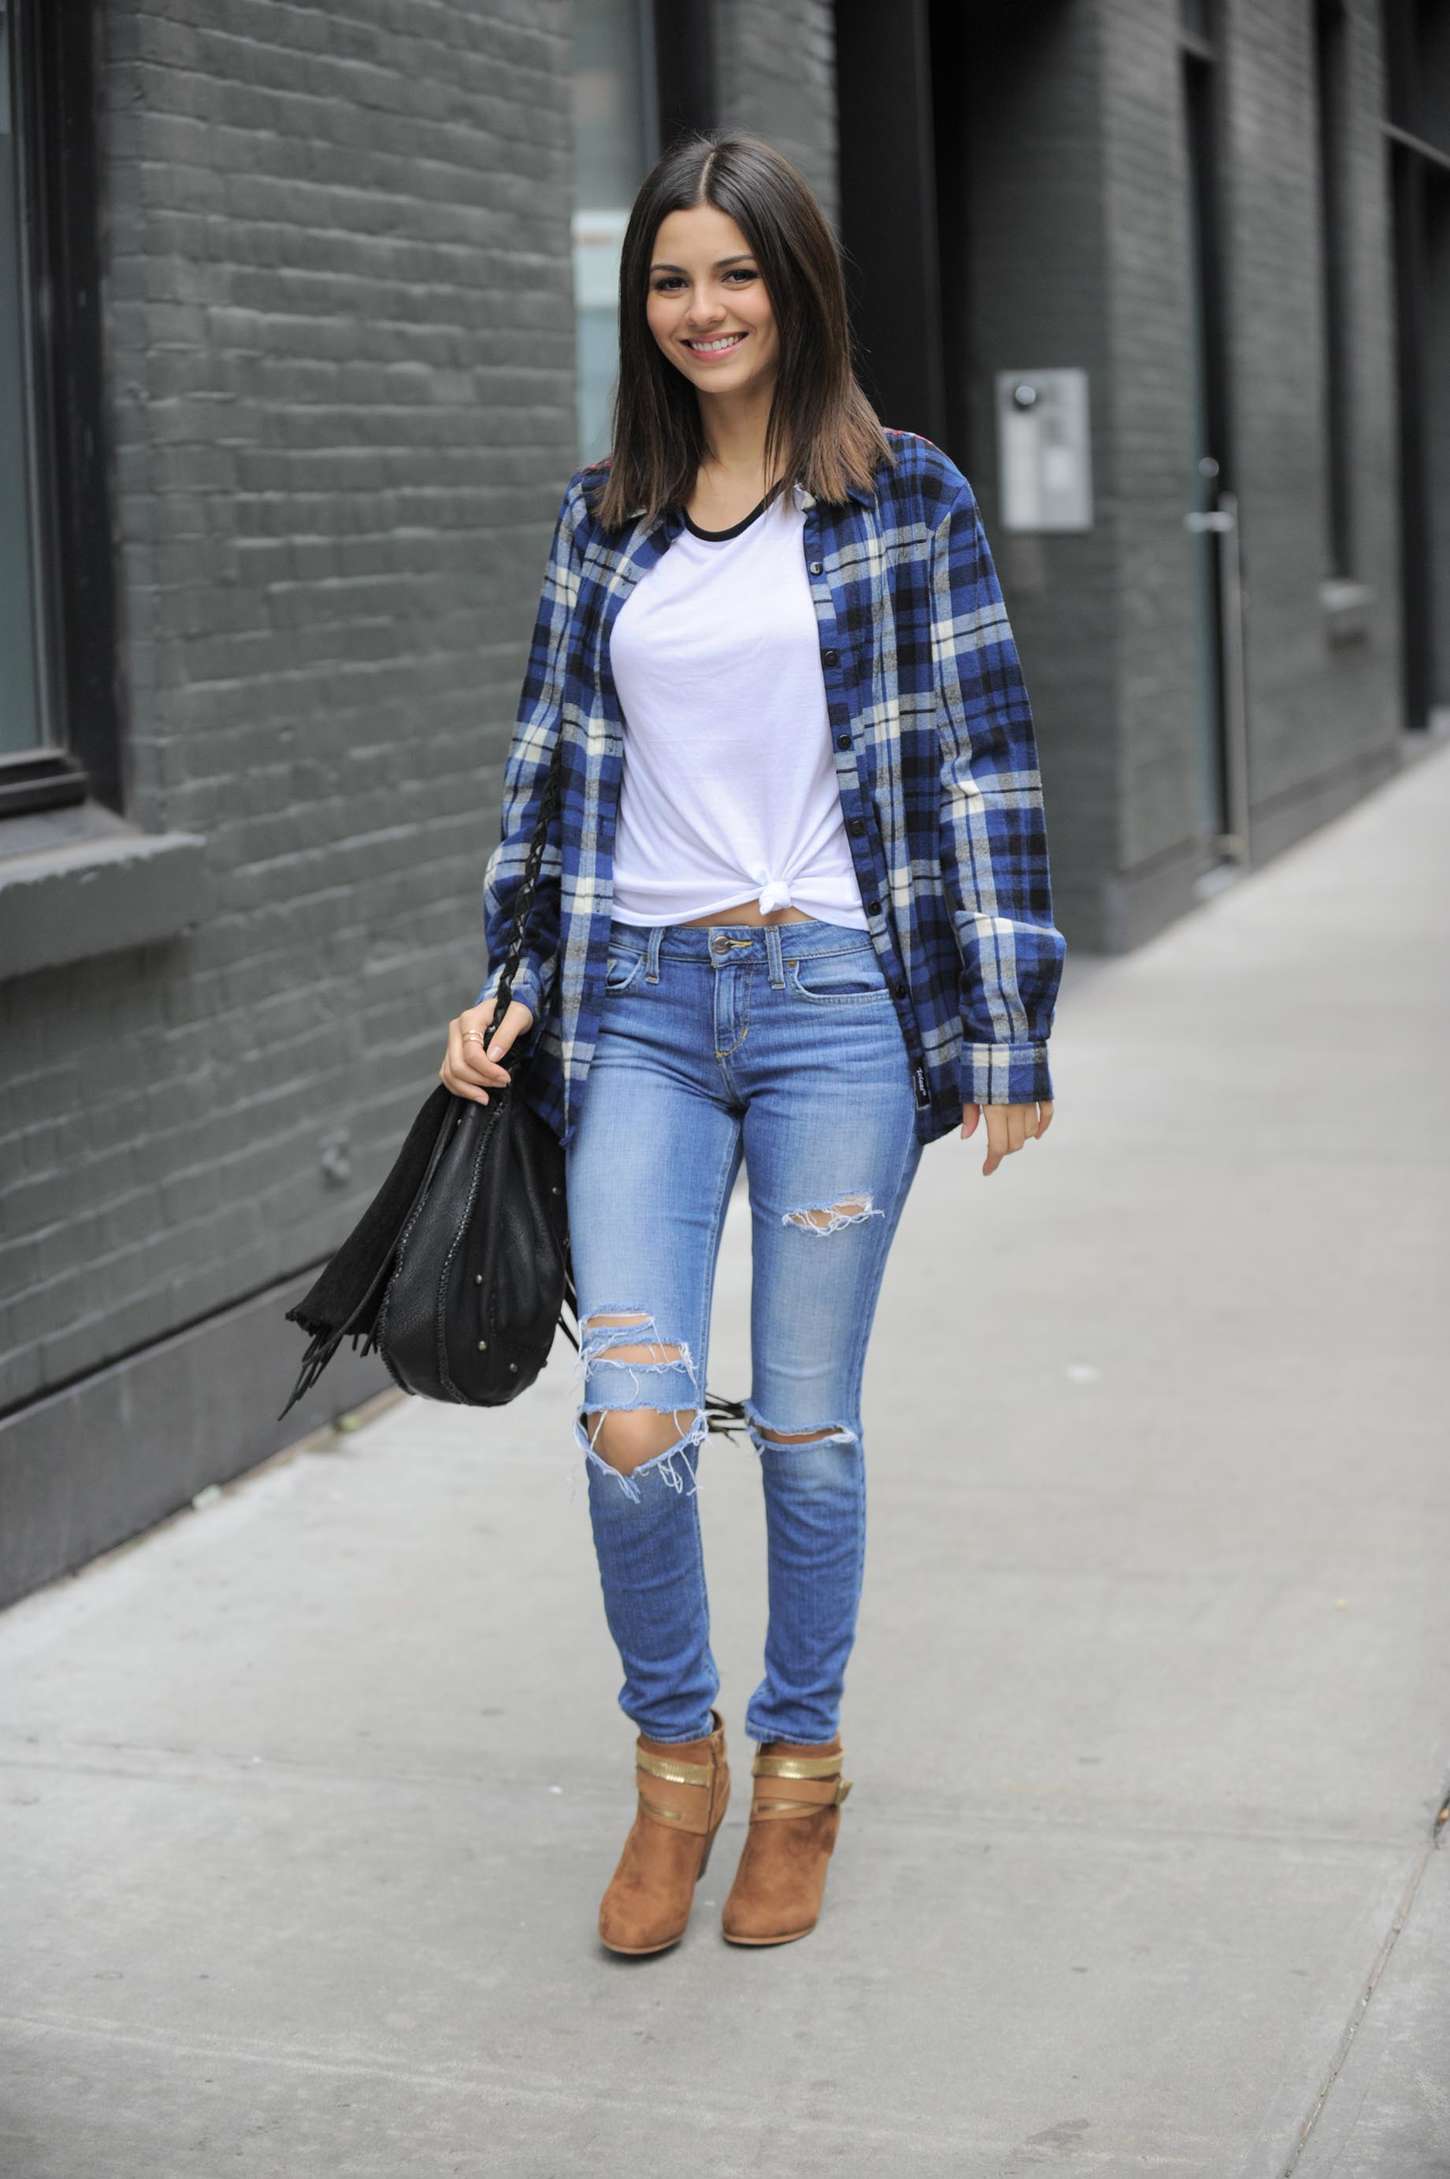 Victoria Justice in Ripped Jeans Out in New York City